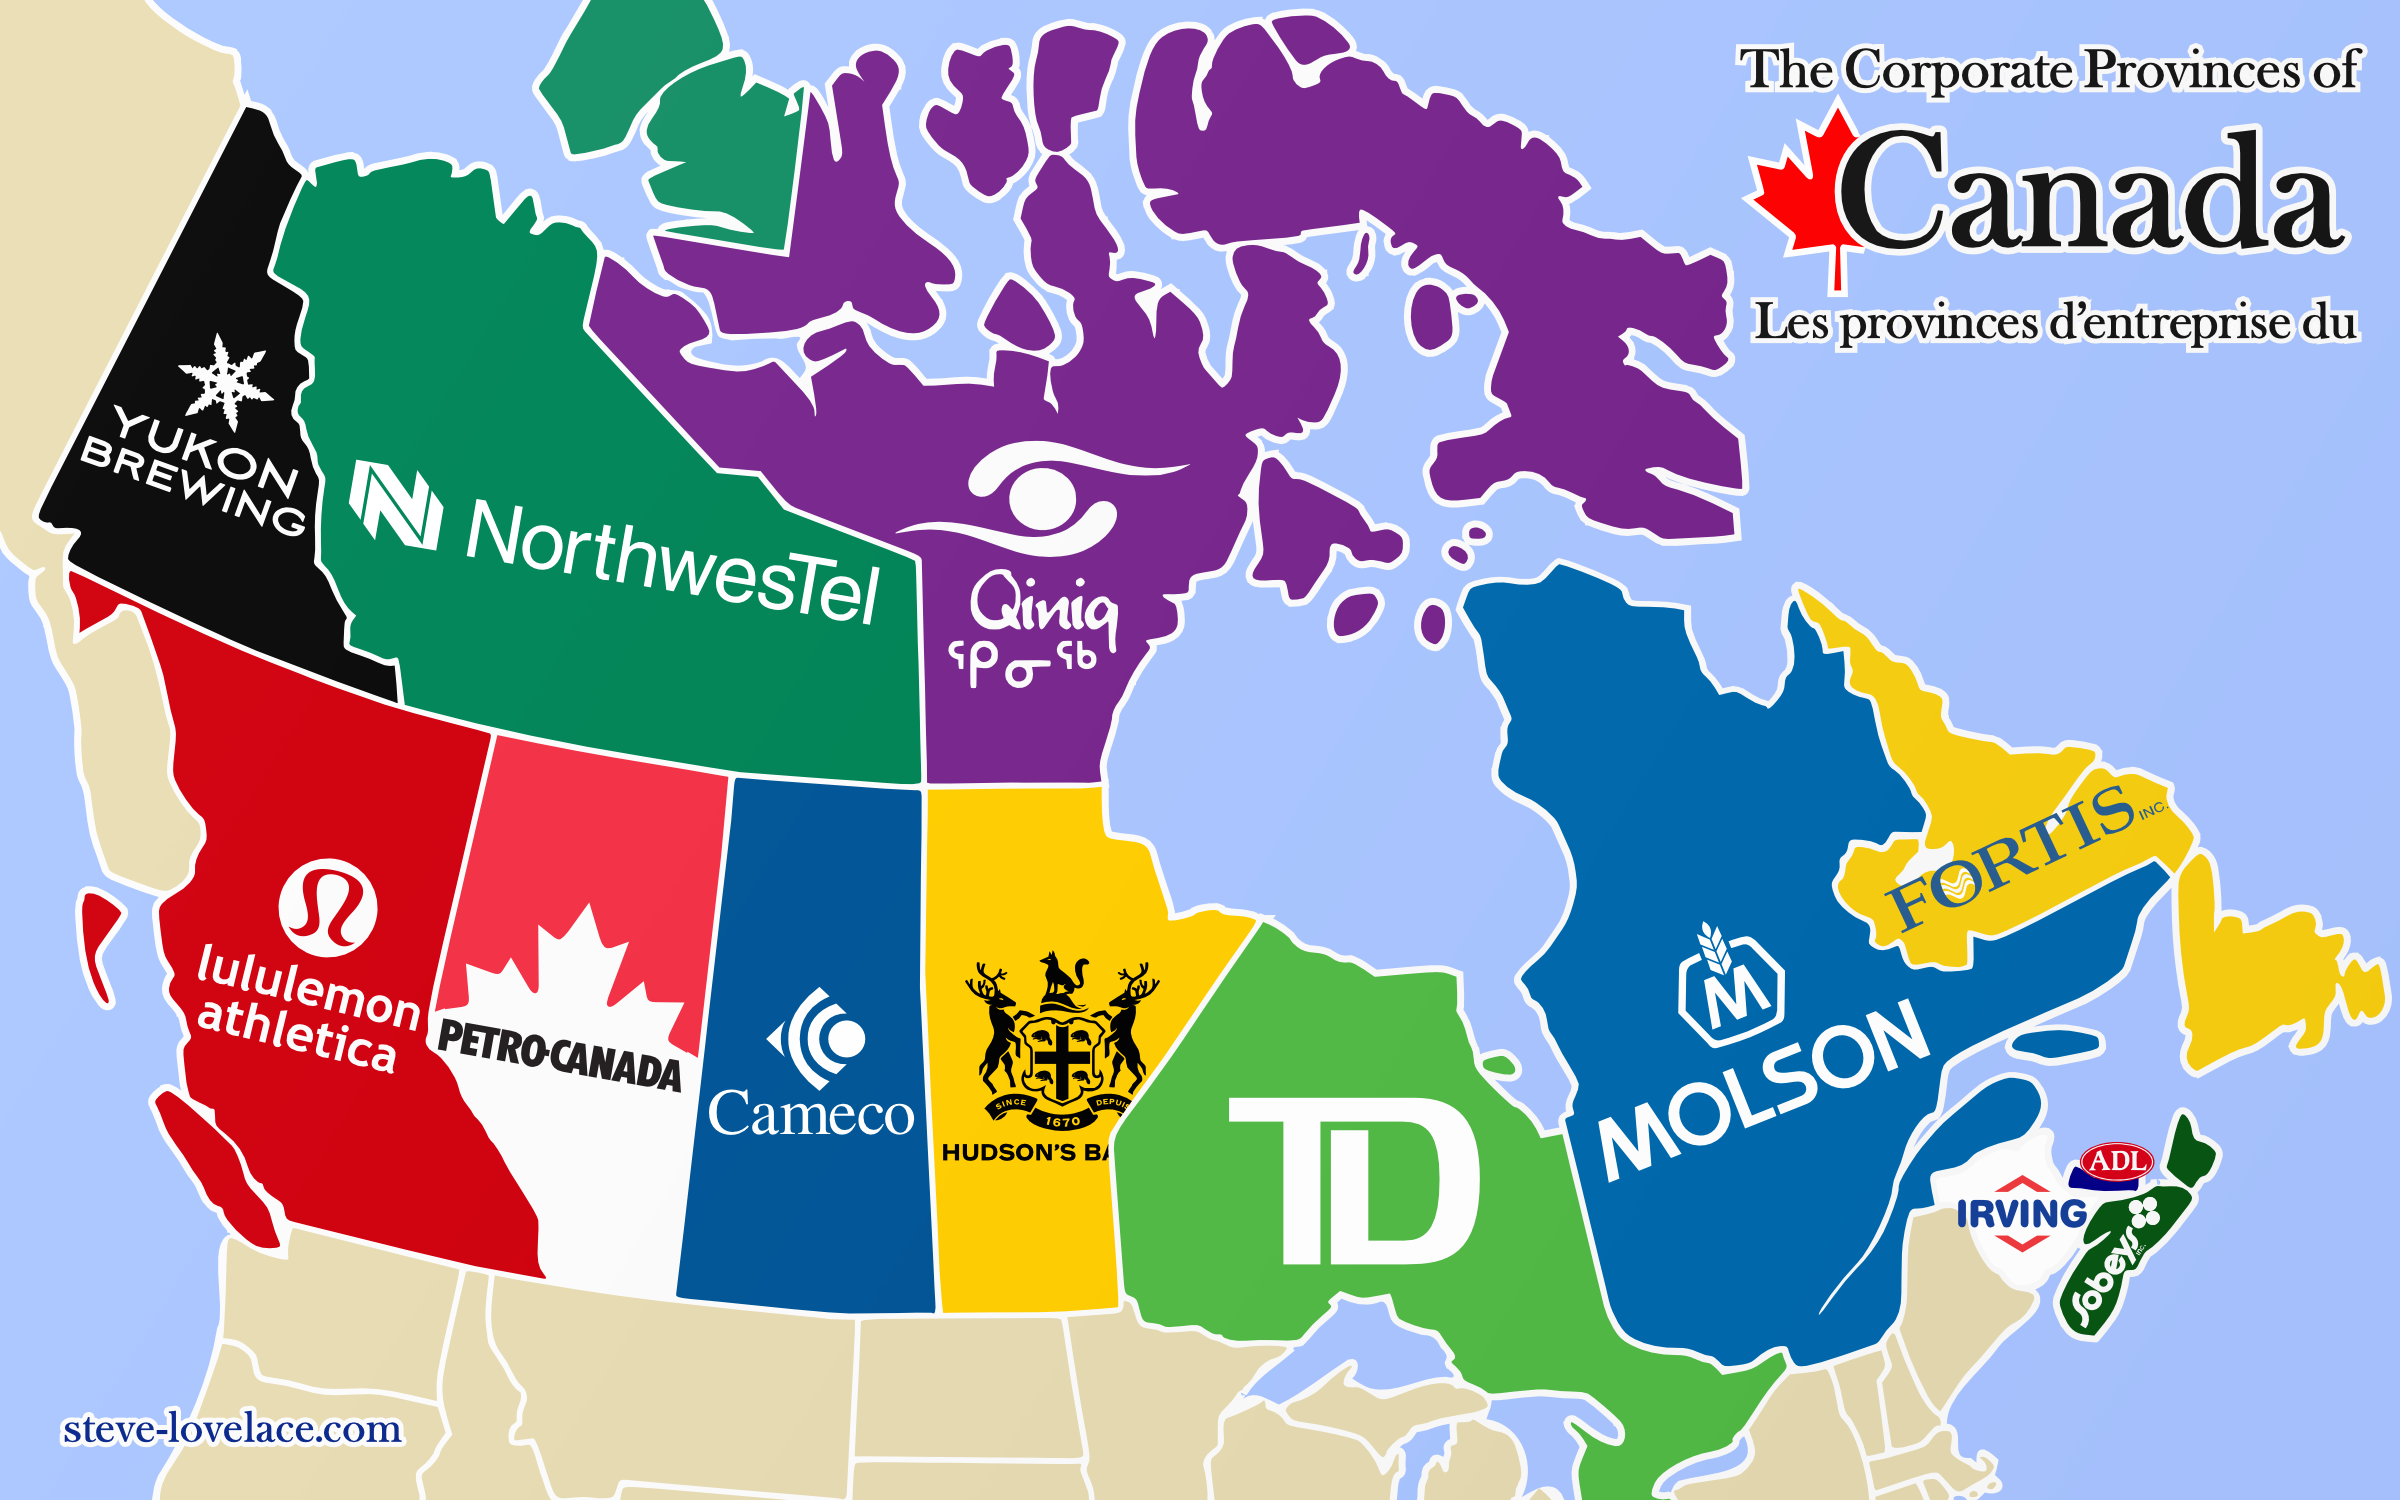 The Corporate Provinces of Canada